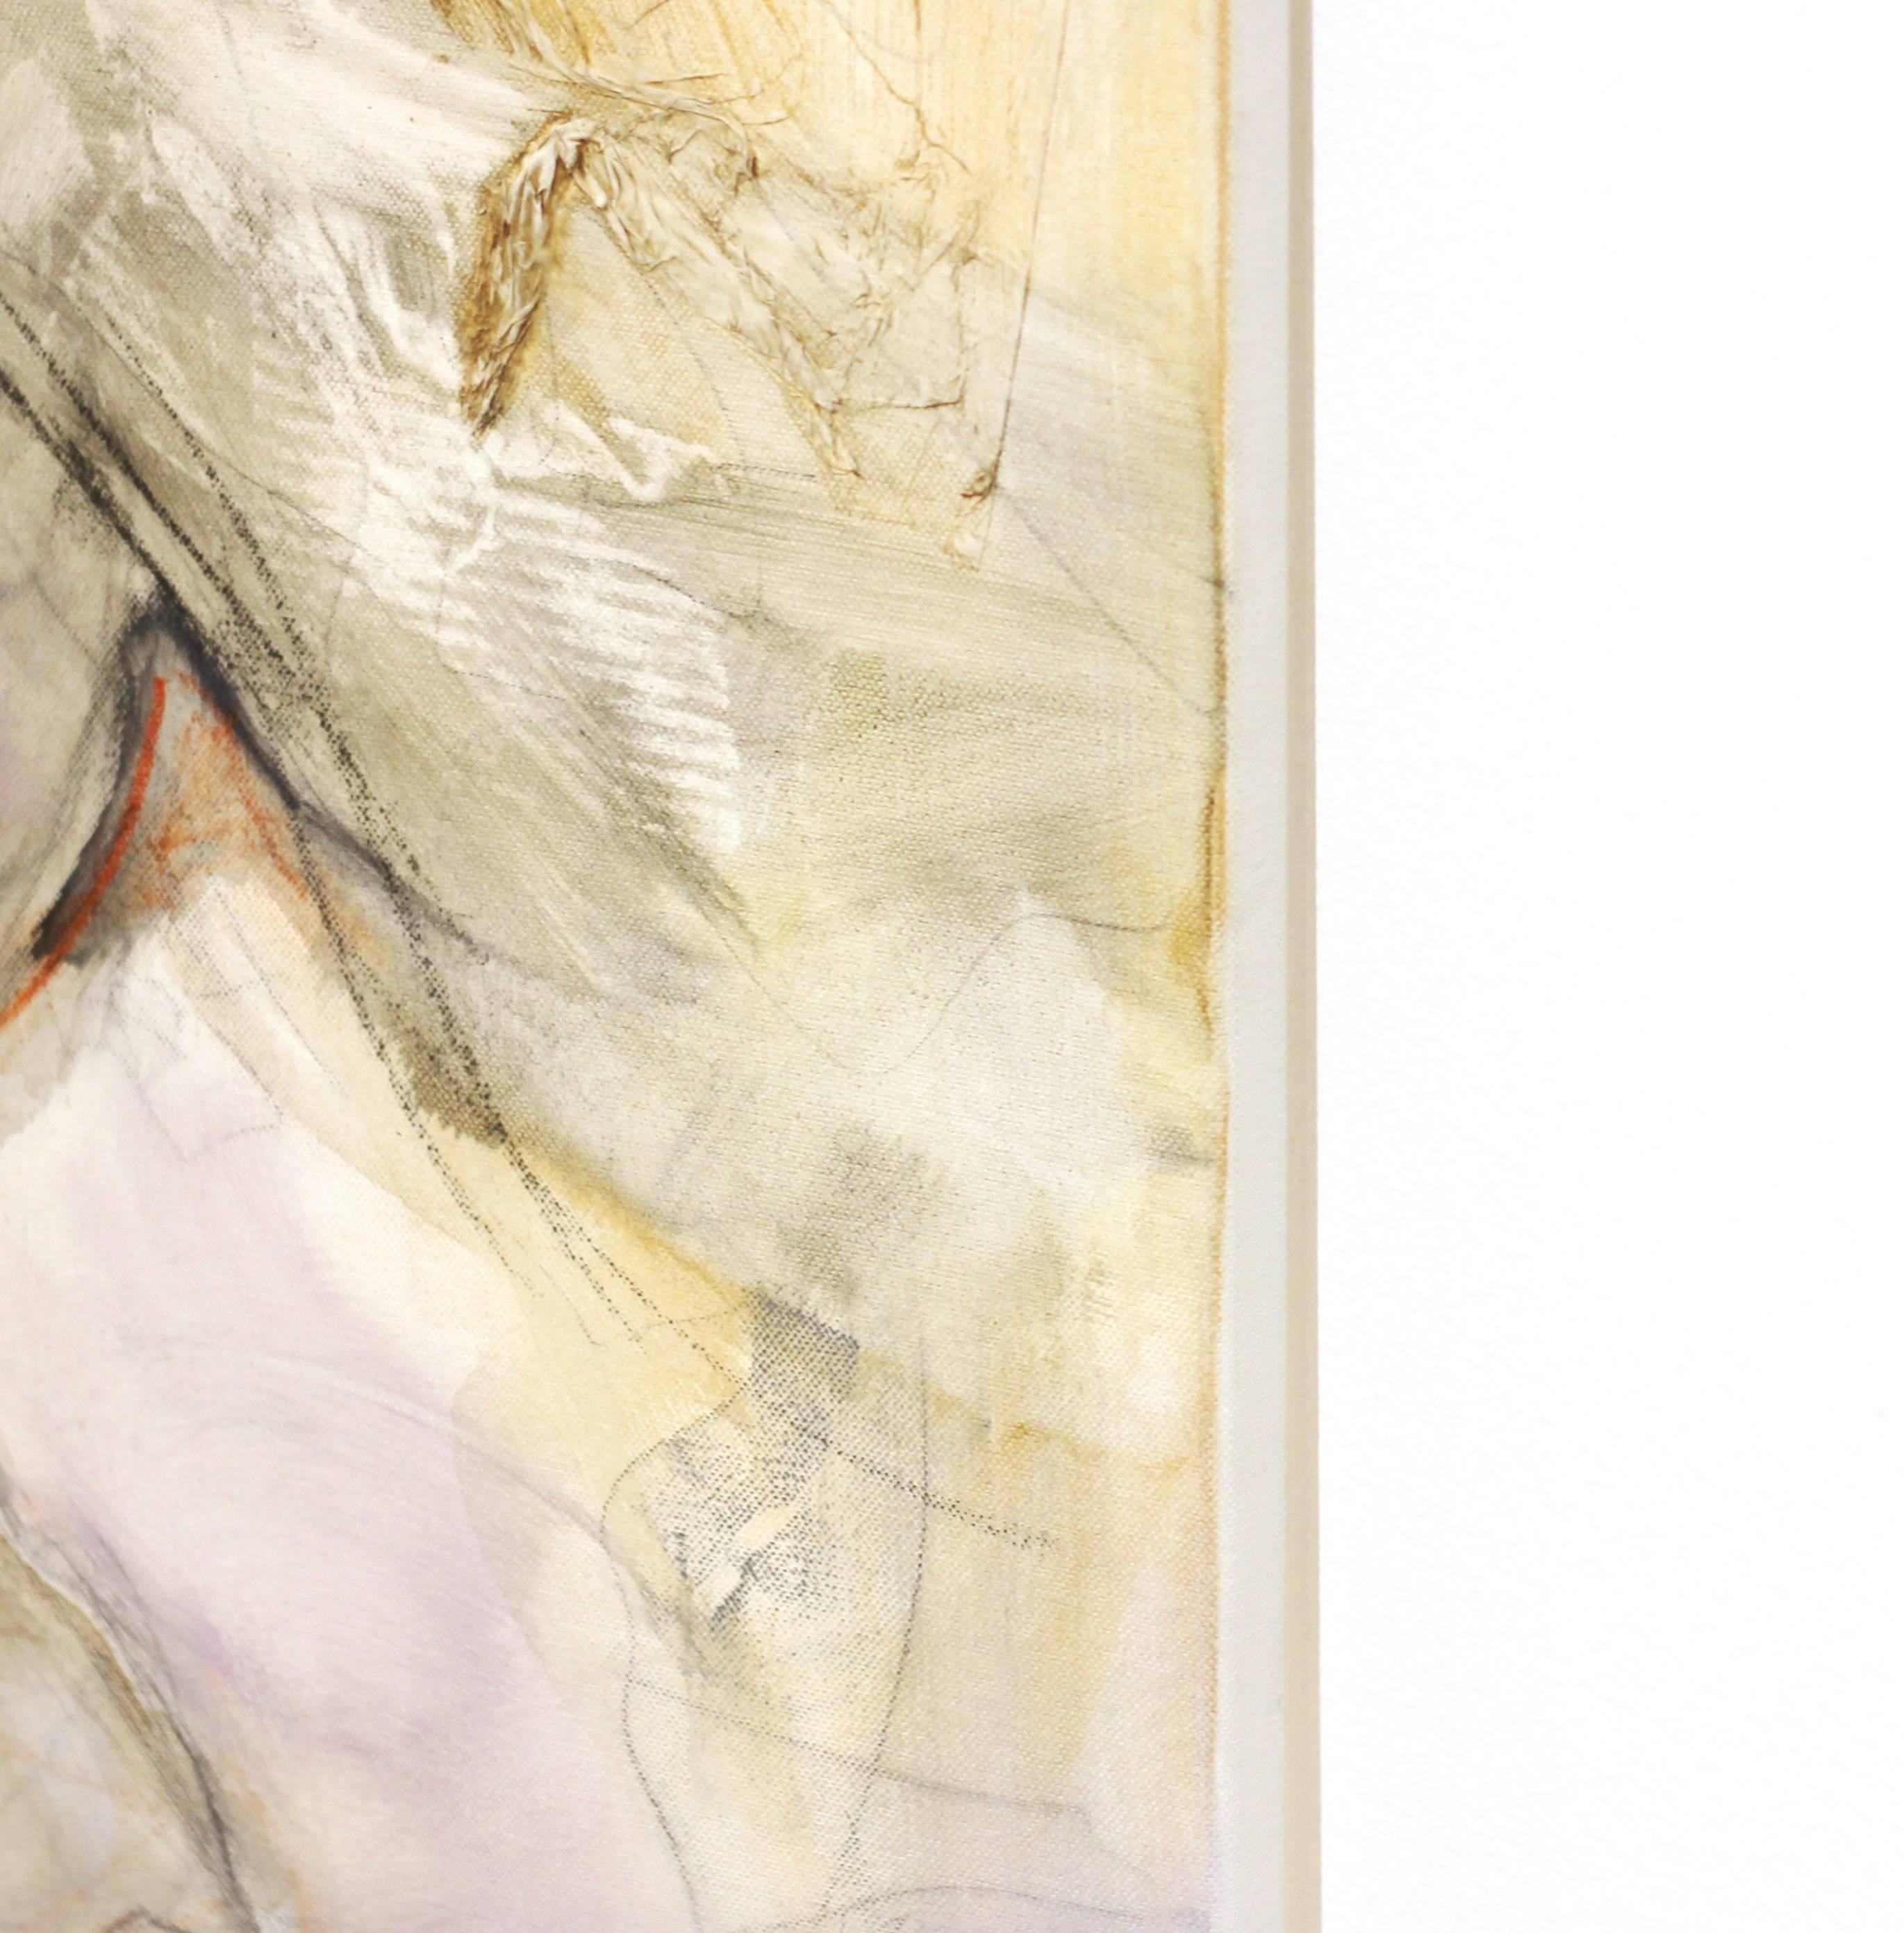 New Dresses - Soft Toned Sensitive Portrayal of Intimate Figures Graceful Nudes - Contemporary Painting by Gabriele Mierzwa